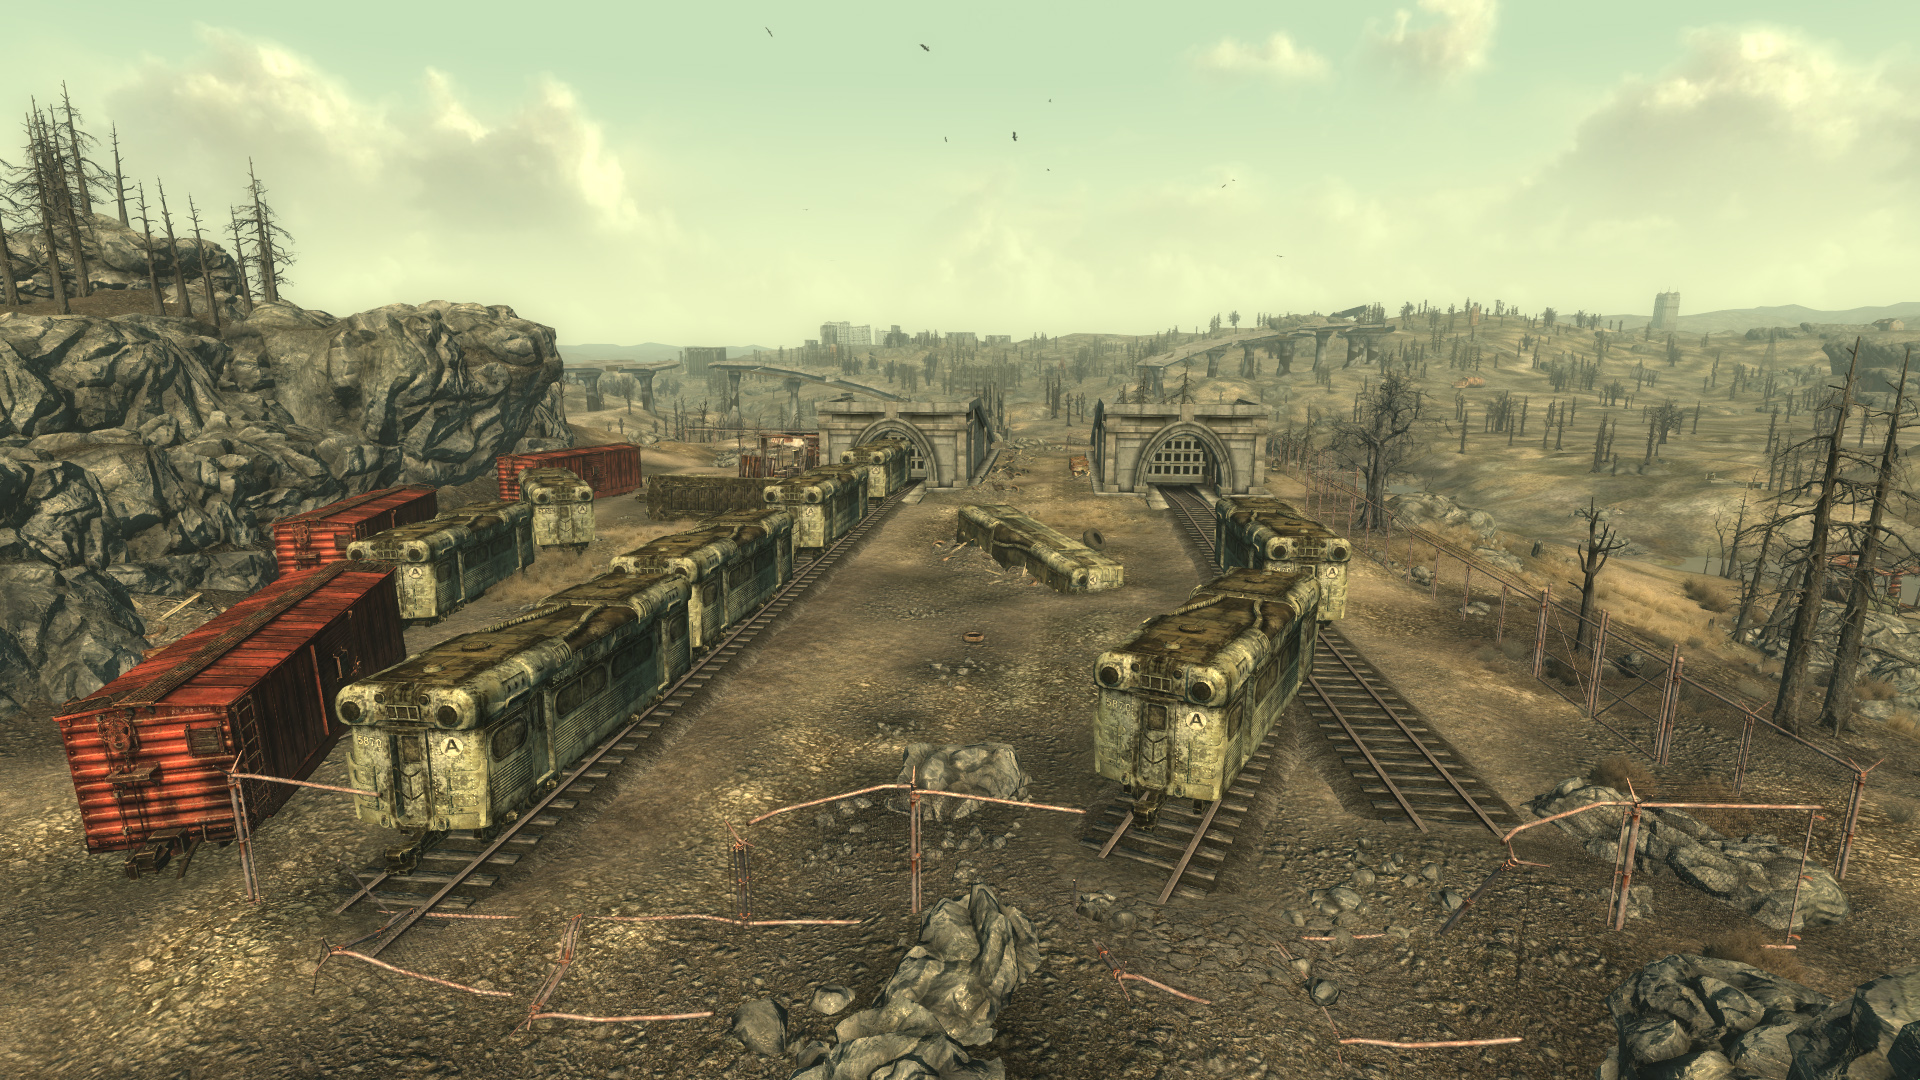 abandoned train yards hd wallpaper for your desktop background or